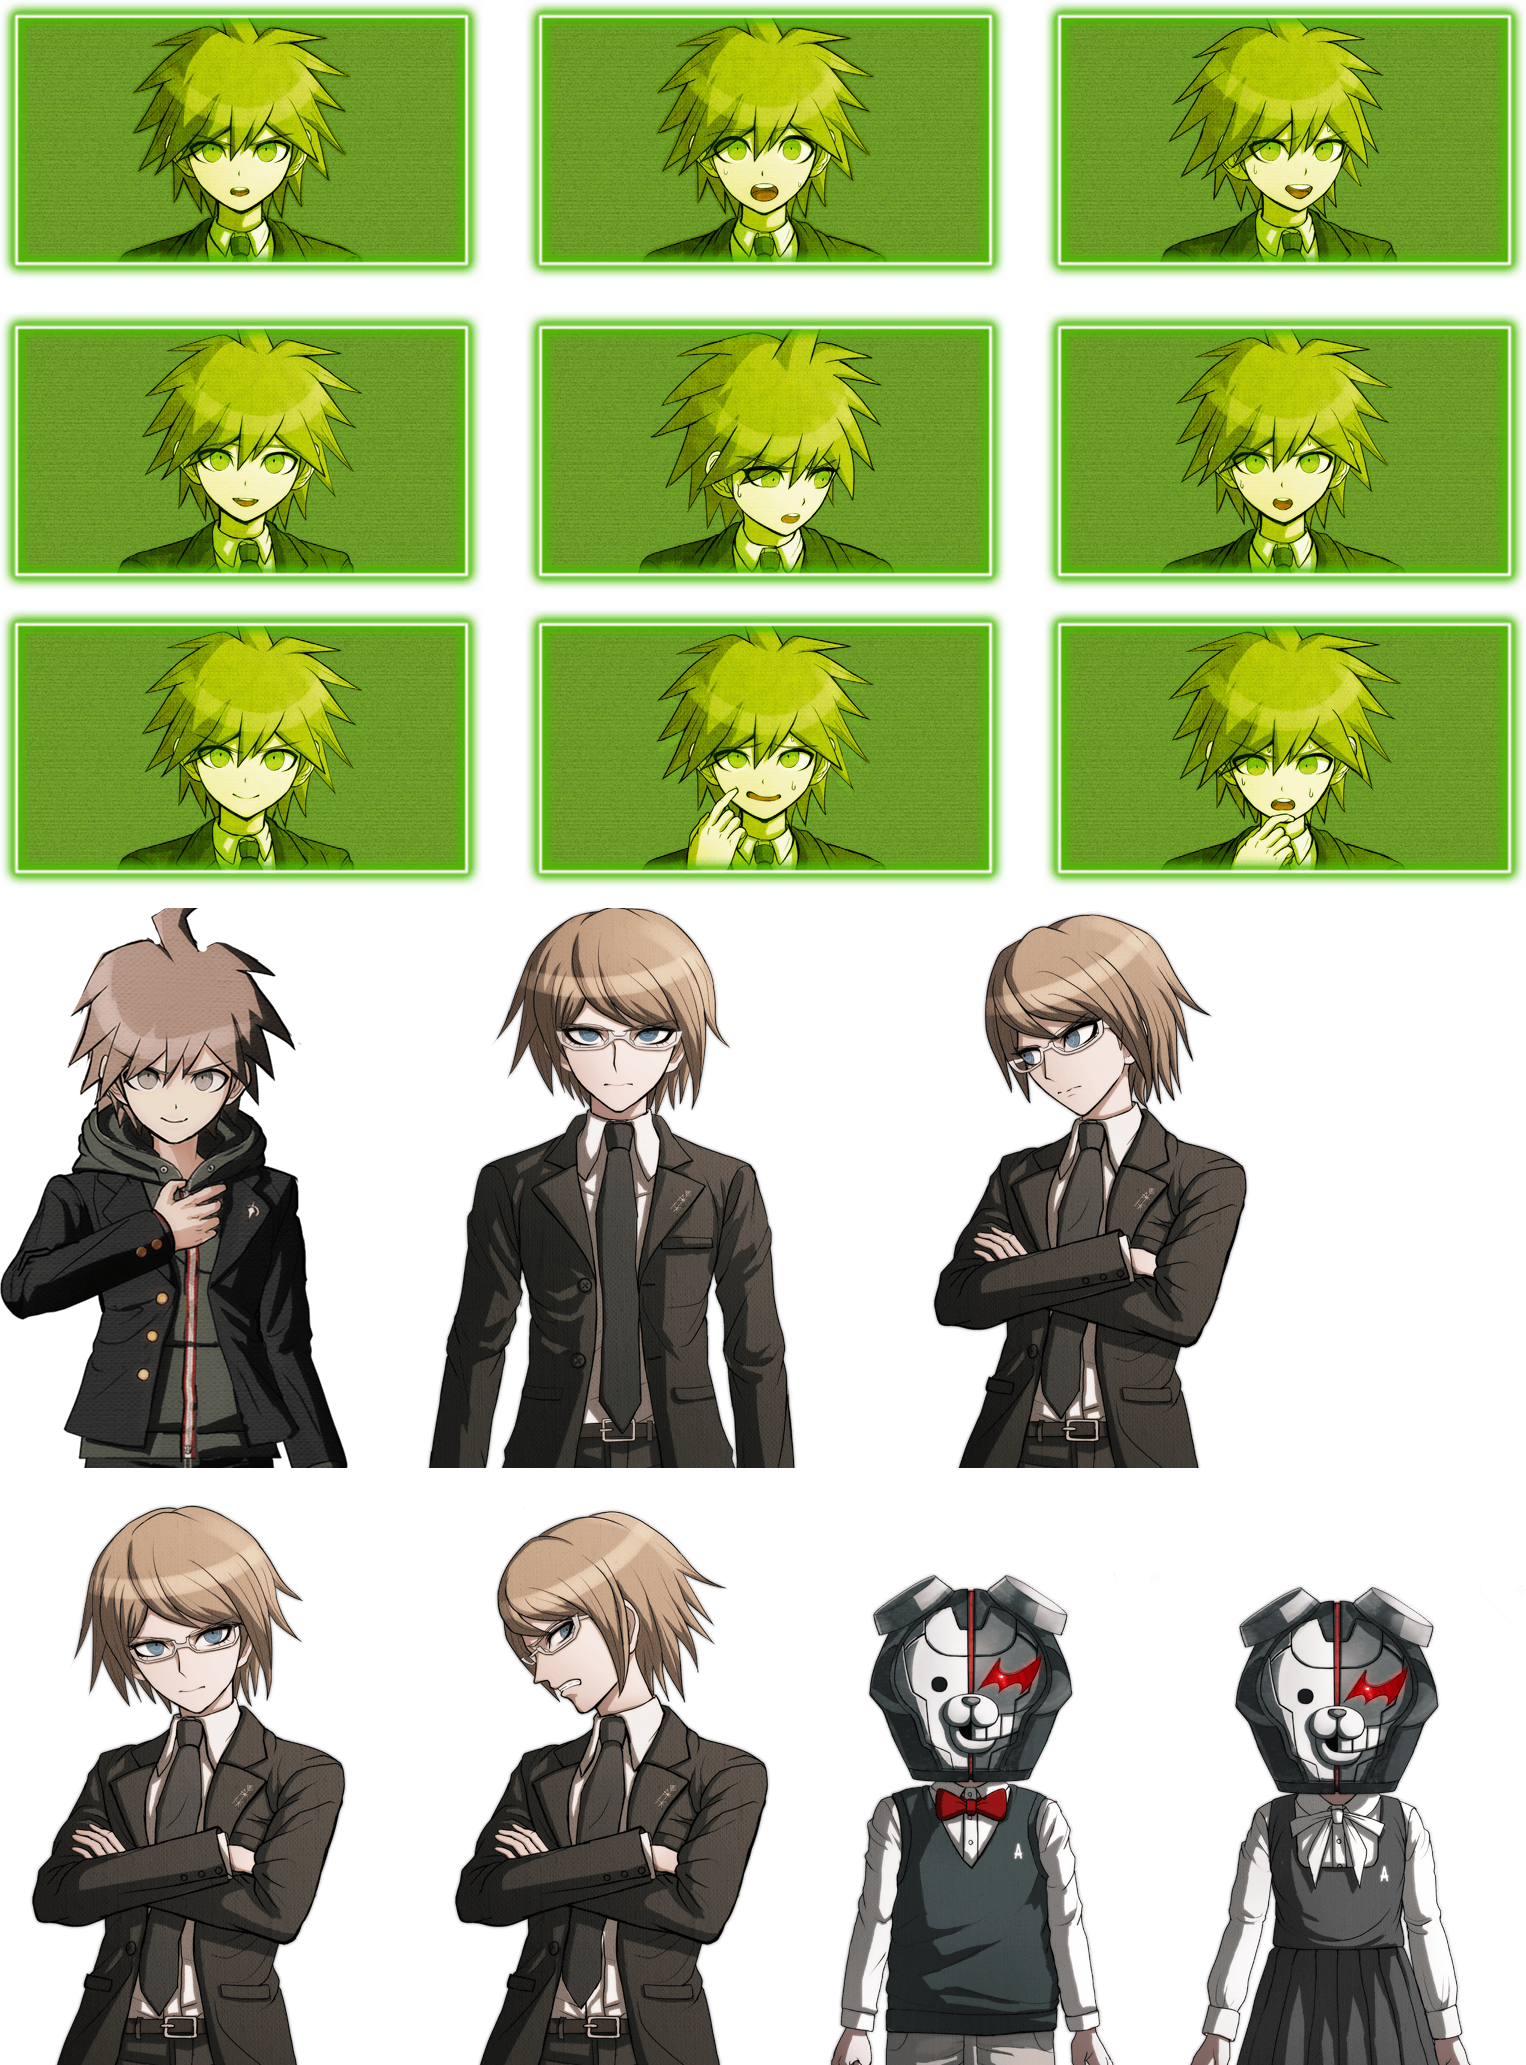 Danganronpa Another Episode: Ultra Despair Girls - Other Characters